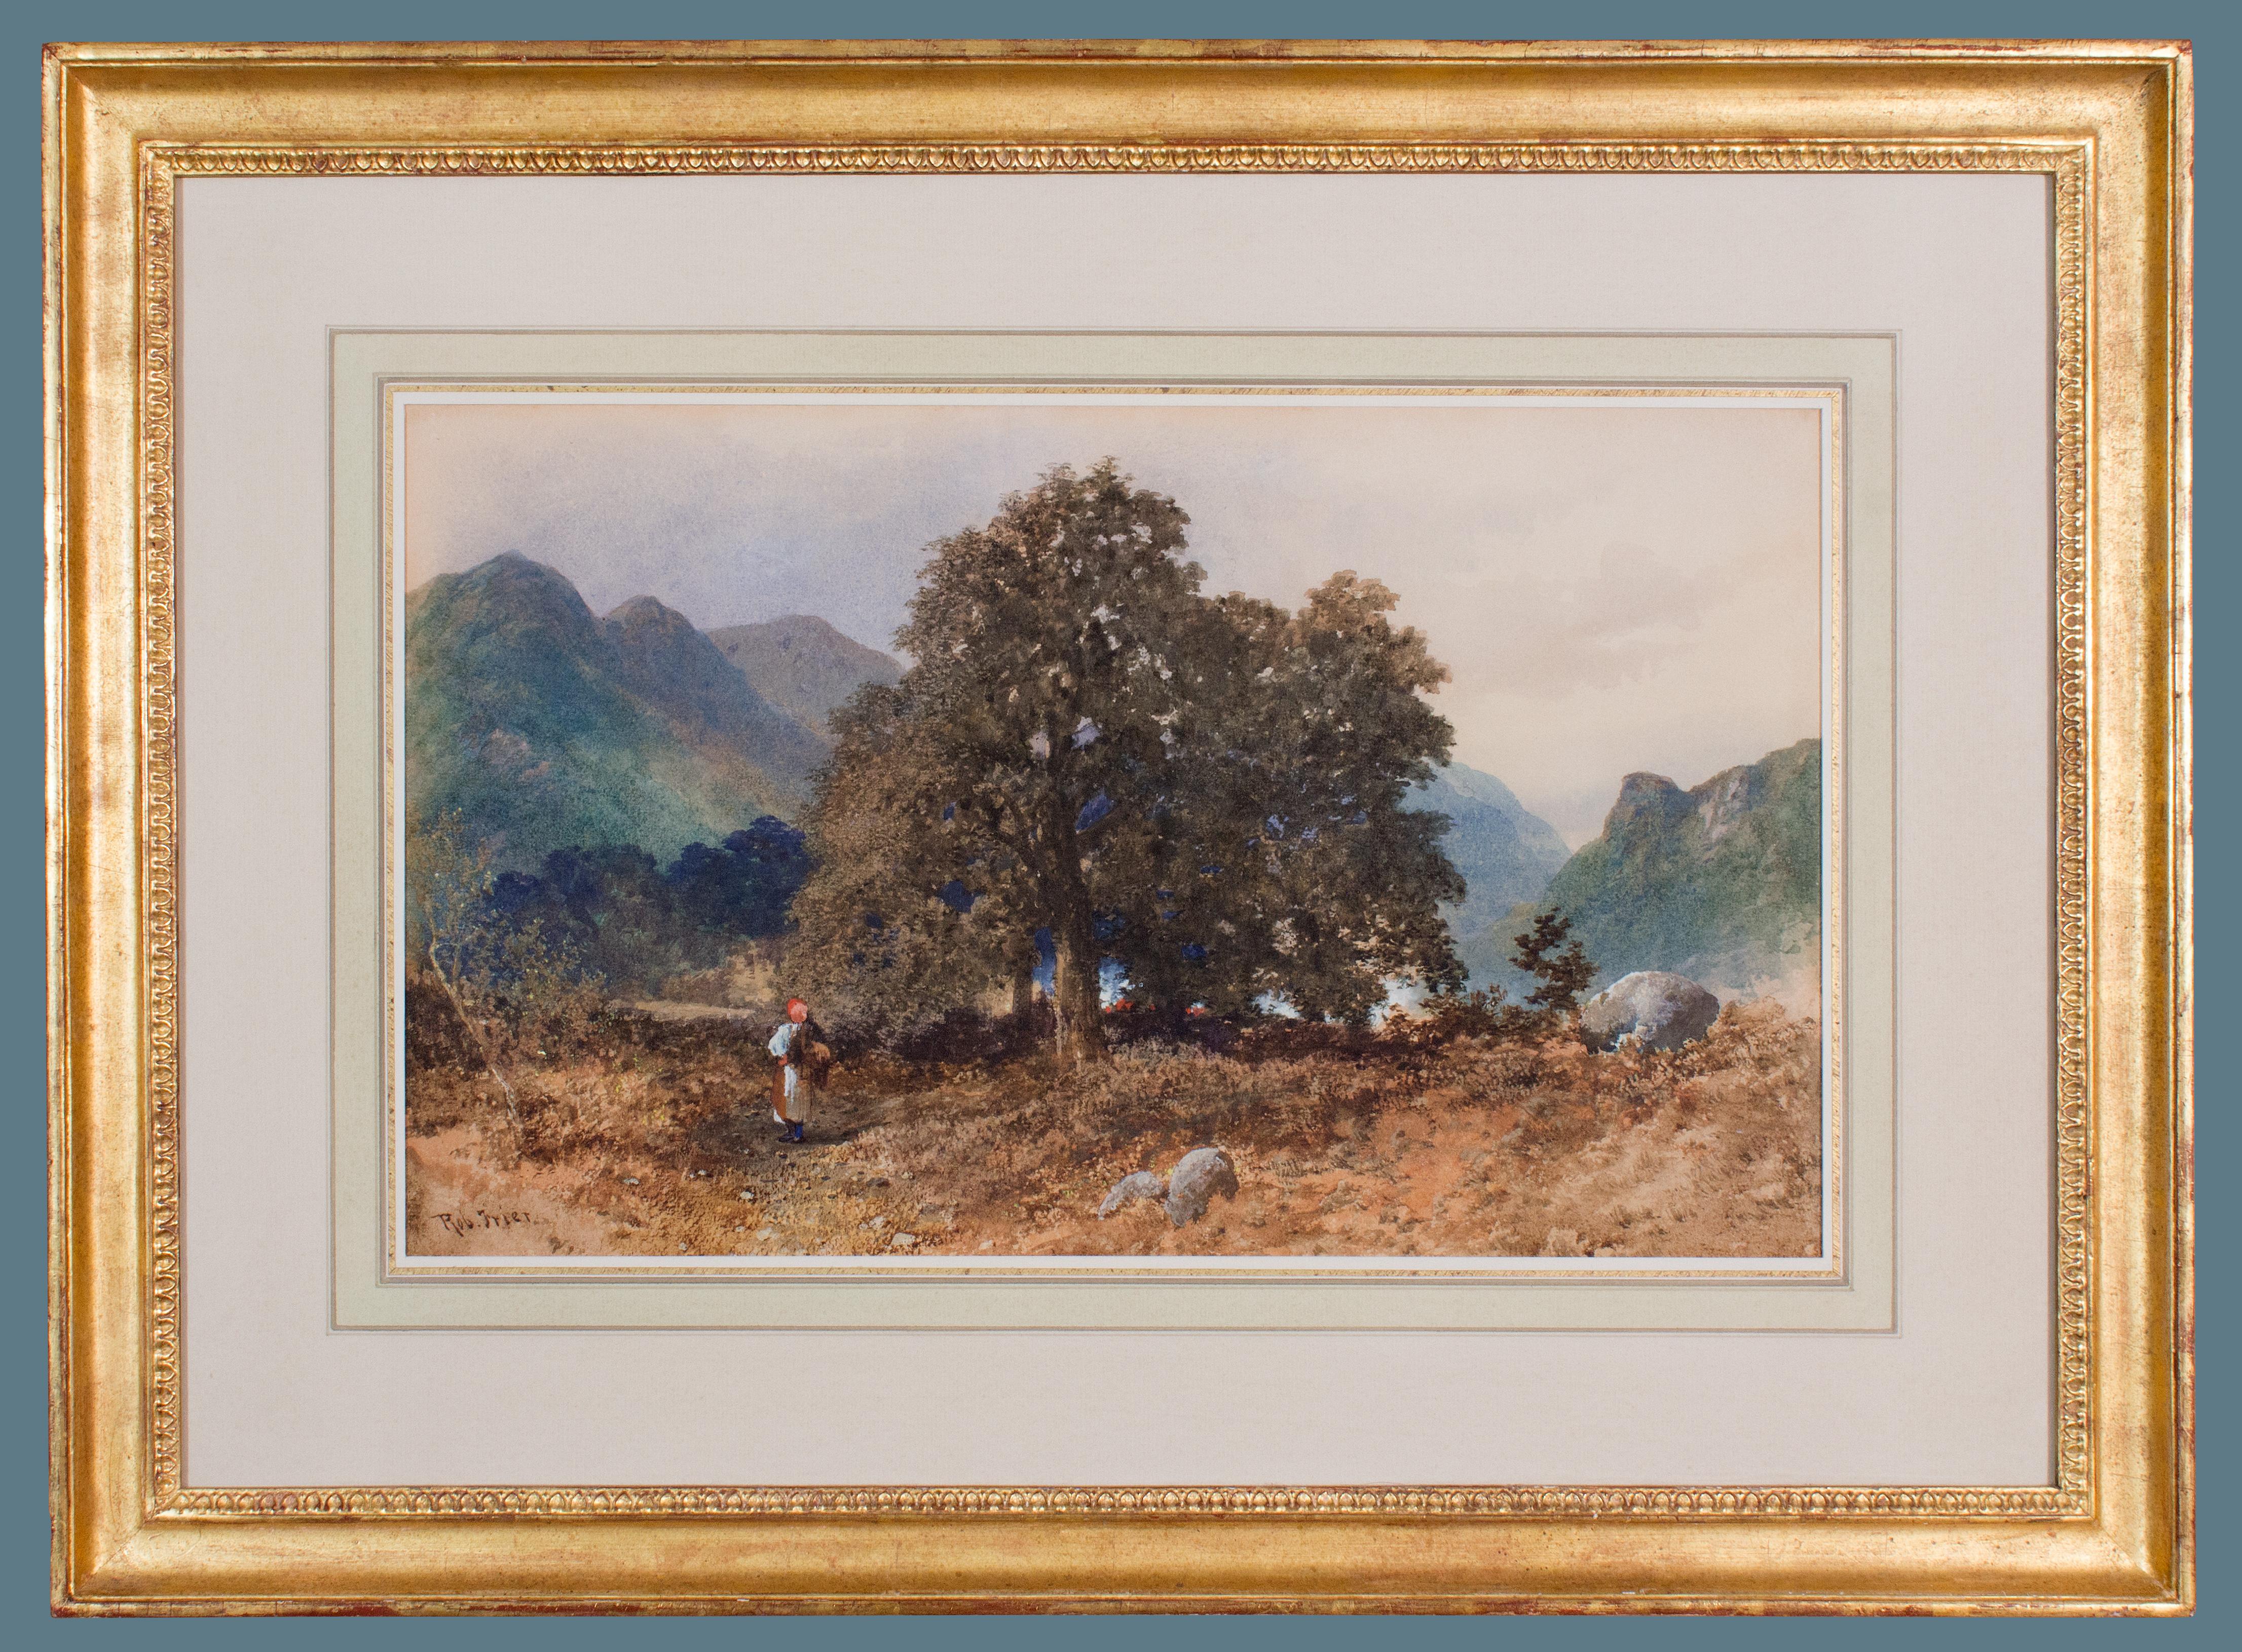 Robert Frier
(Scottish, 1855–1912)
Scottish Landscape
Watercolor on paper, 11 x 18 3/4 inches (sight)
Framed: 21 x 28 inches (approx.)
Signed at lower left: "Rob Frier"
Inscribed on verso: (in pencil on modern backing) "Hell's Glen/by English [sic]